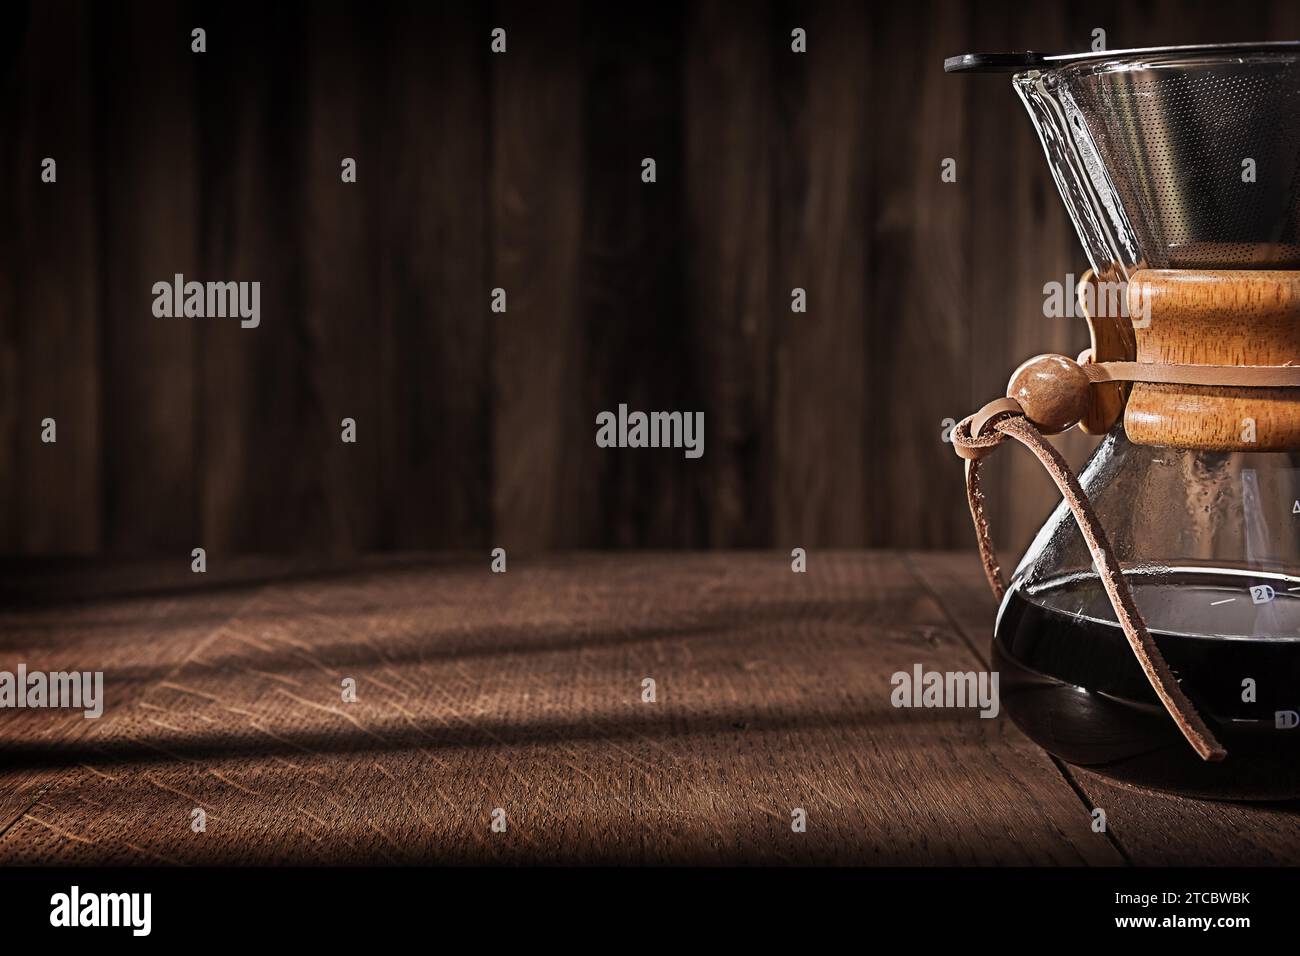 Copy Space Image. Glass Coffee Dripper. Hot Fresh Brewed Flavoured Coffee. Alternative Method To Make Delicious Flavoured Coffee Stock Photo